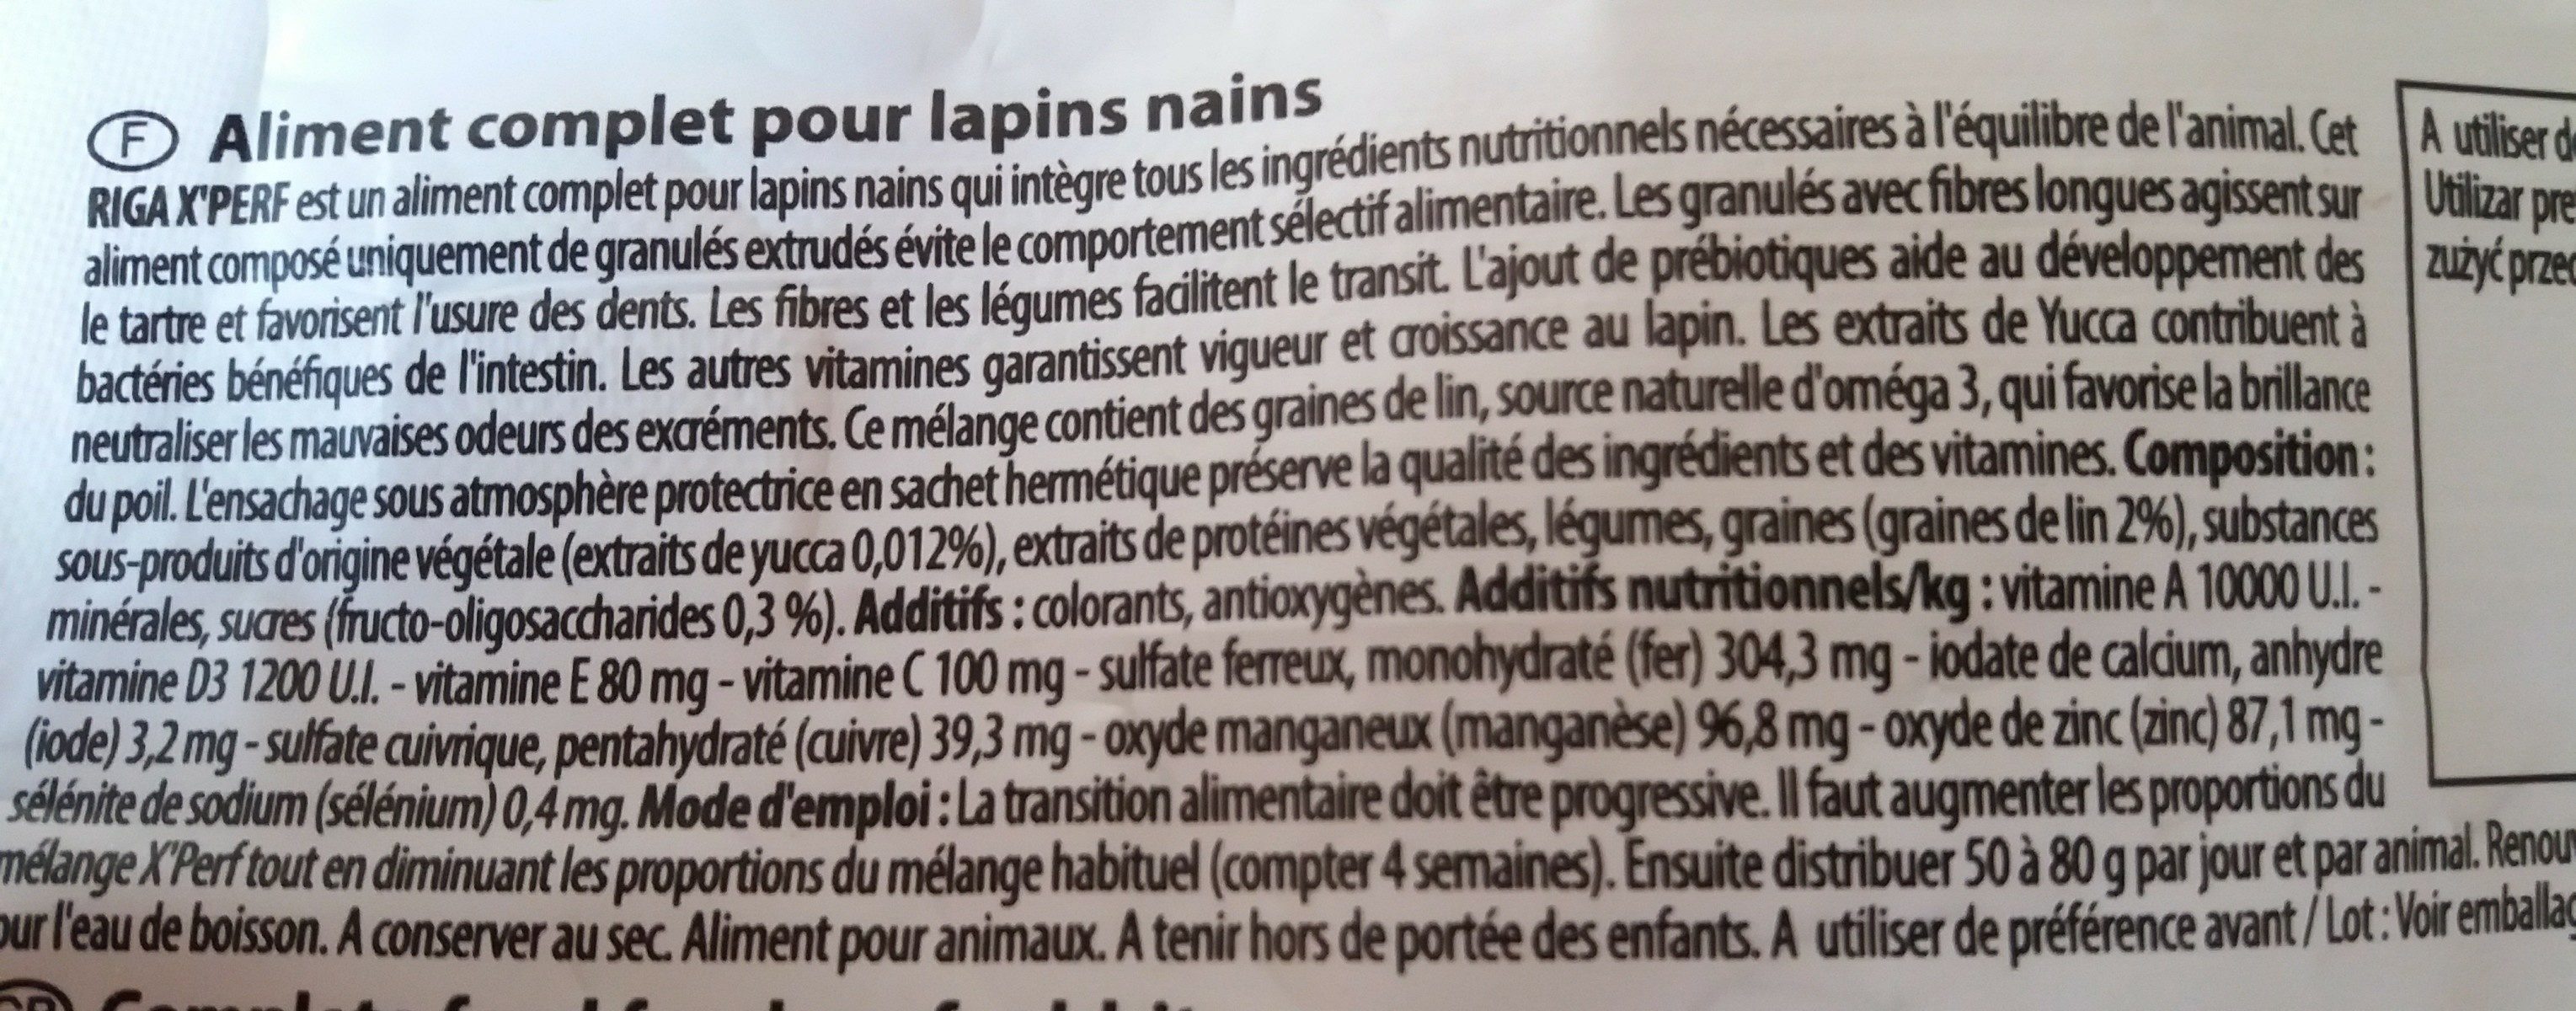 Graine pour lapin nain - Ingredients - fr